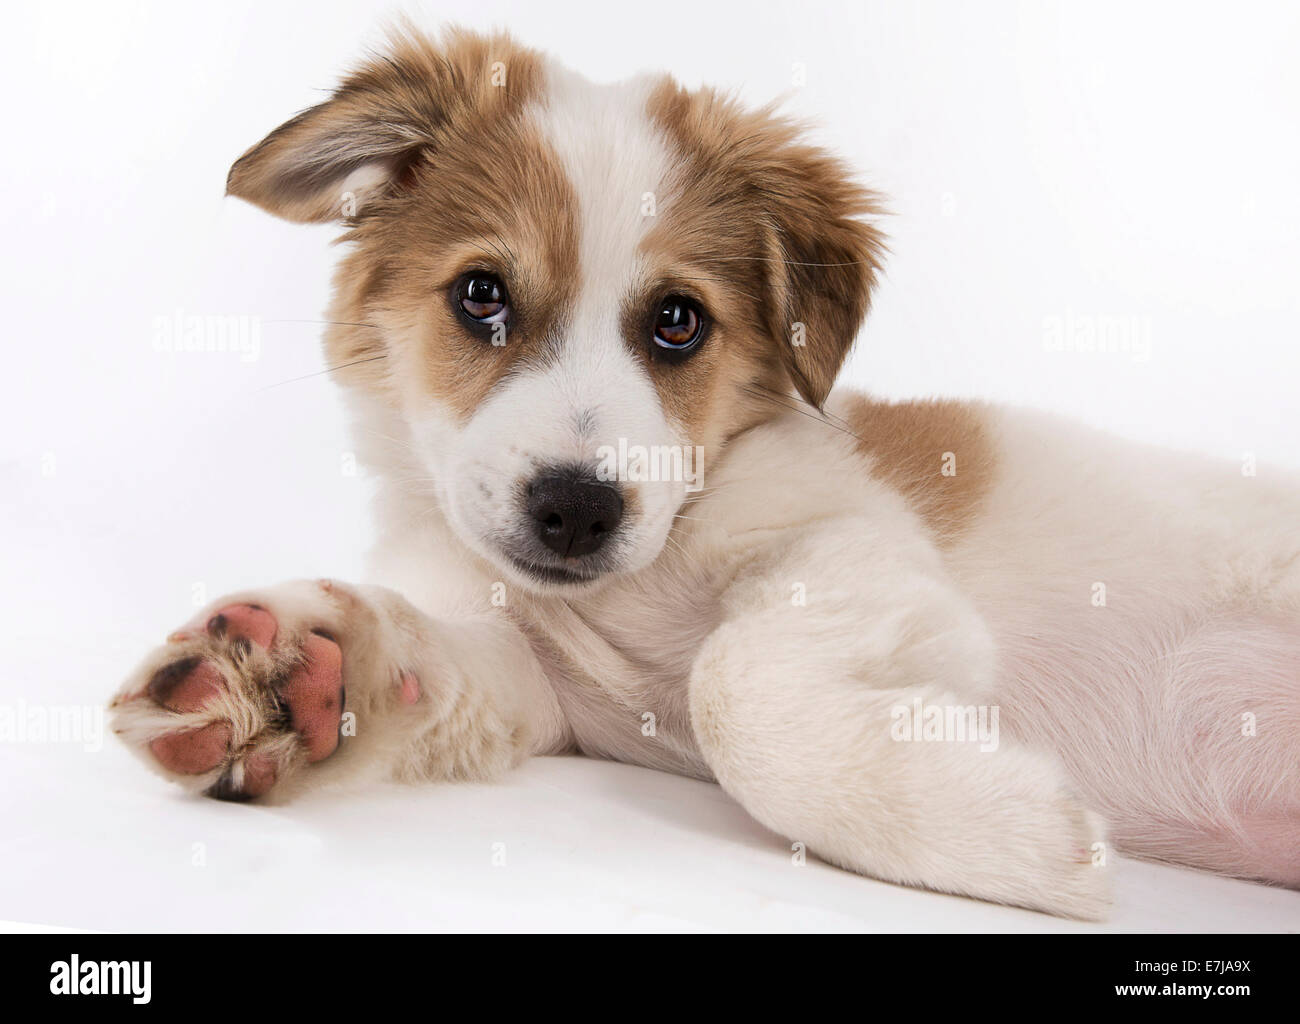 Jack Russell Terrier mix, Puppy Stock Photo - Alamy